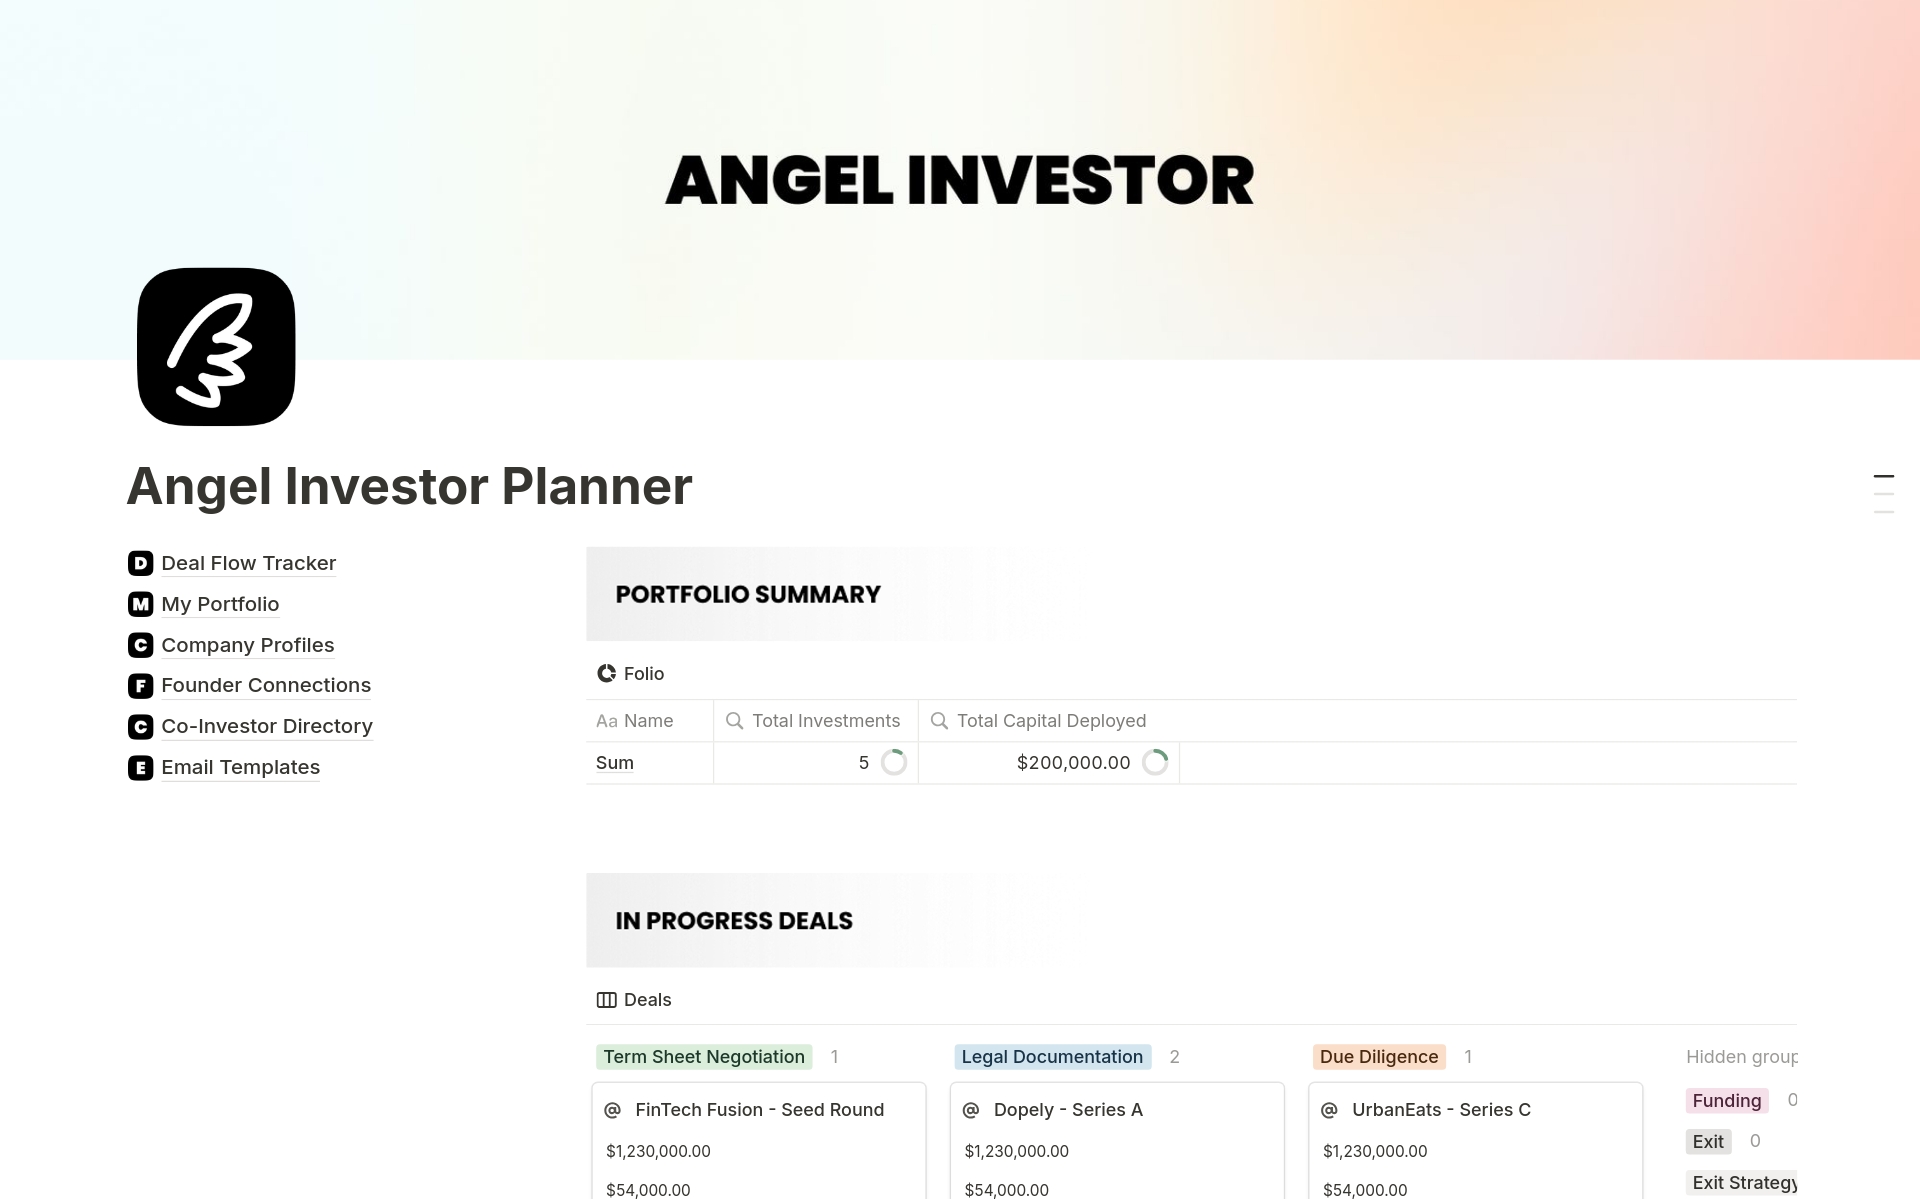 Streamline your angel investments with our comprehensive Notion template. Manage your deal flow, track portfolio performance, and maintain strong connections with founders and co-investors—all in one place.